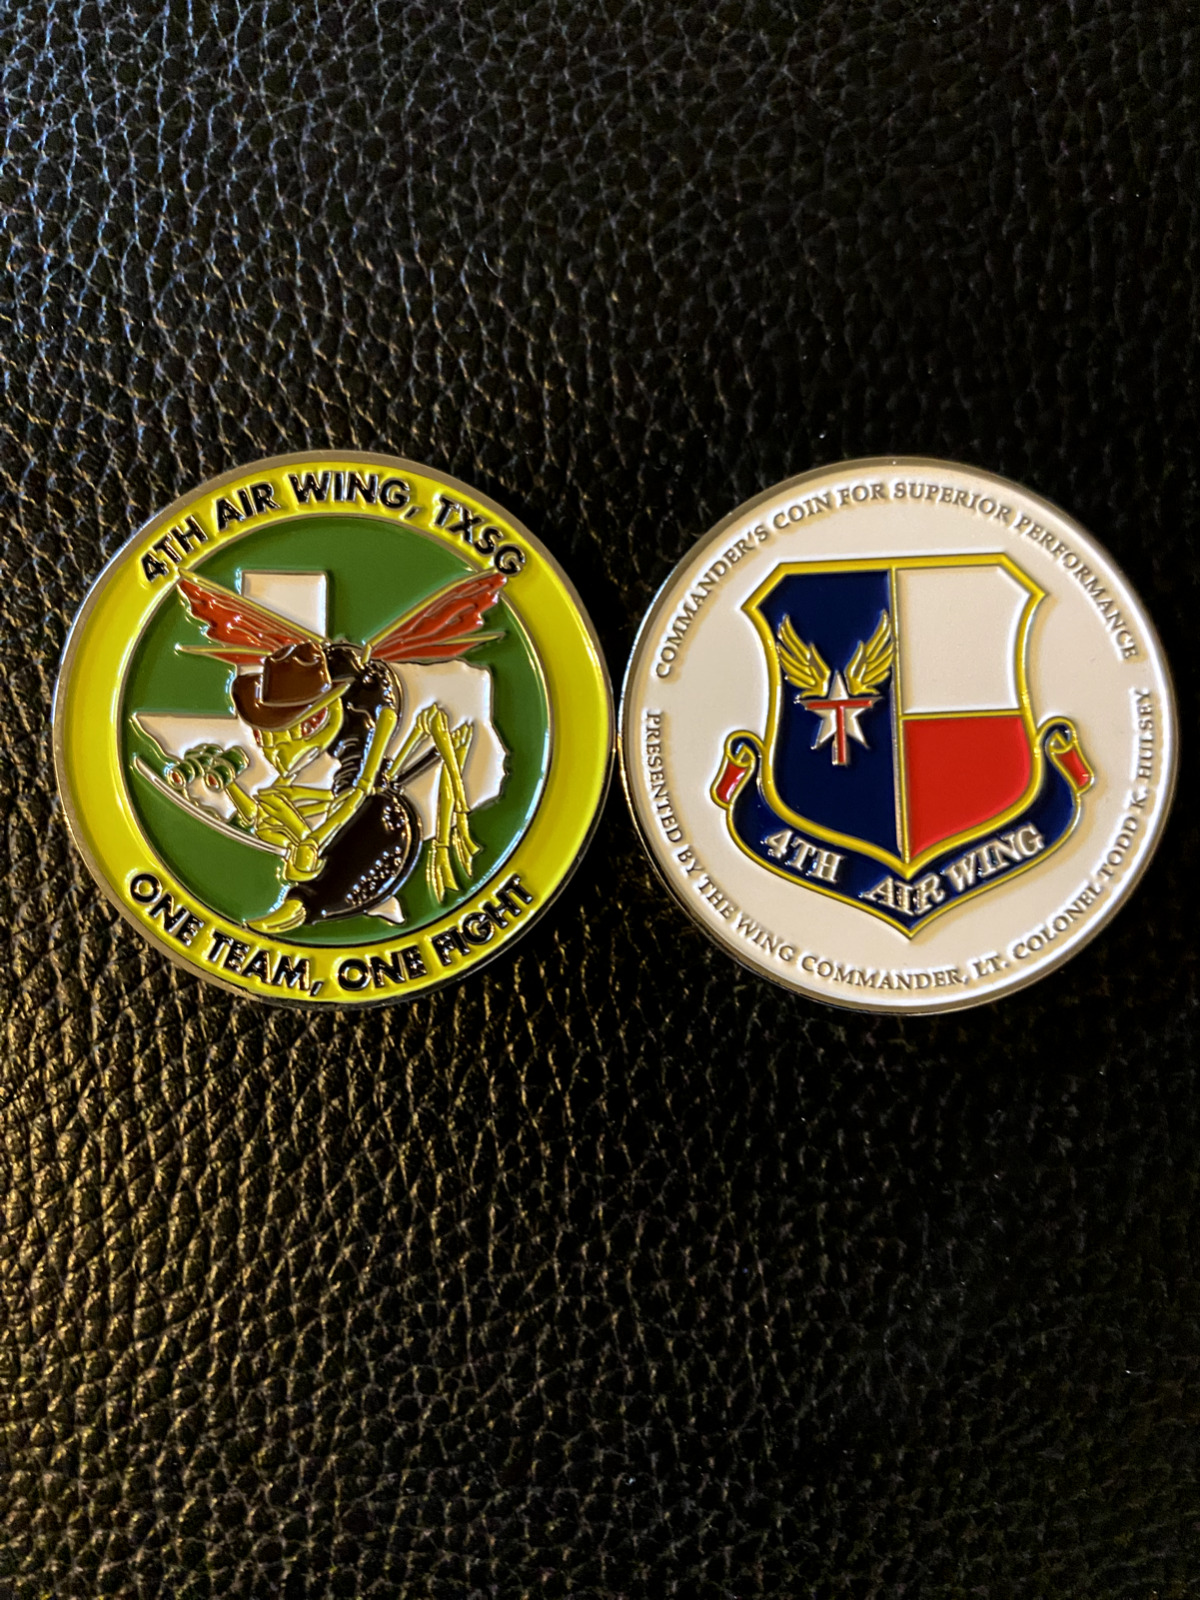 Texas State Guard 4th Air Wing The Texas Dirt Wasps challenge coin 